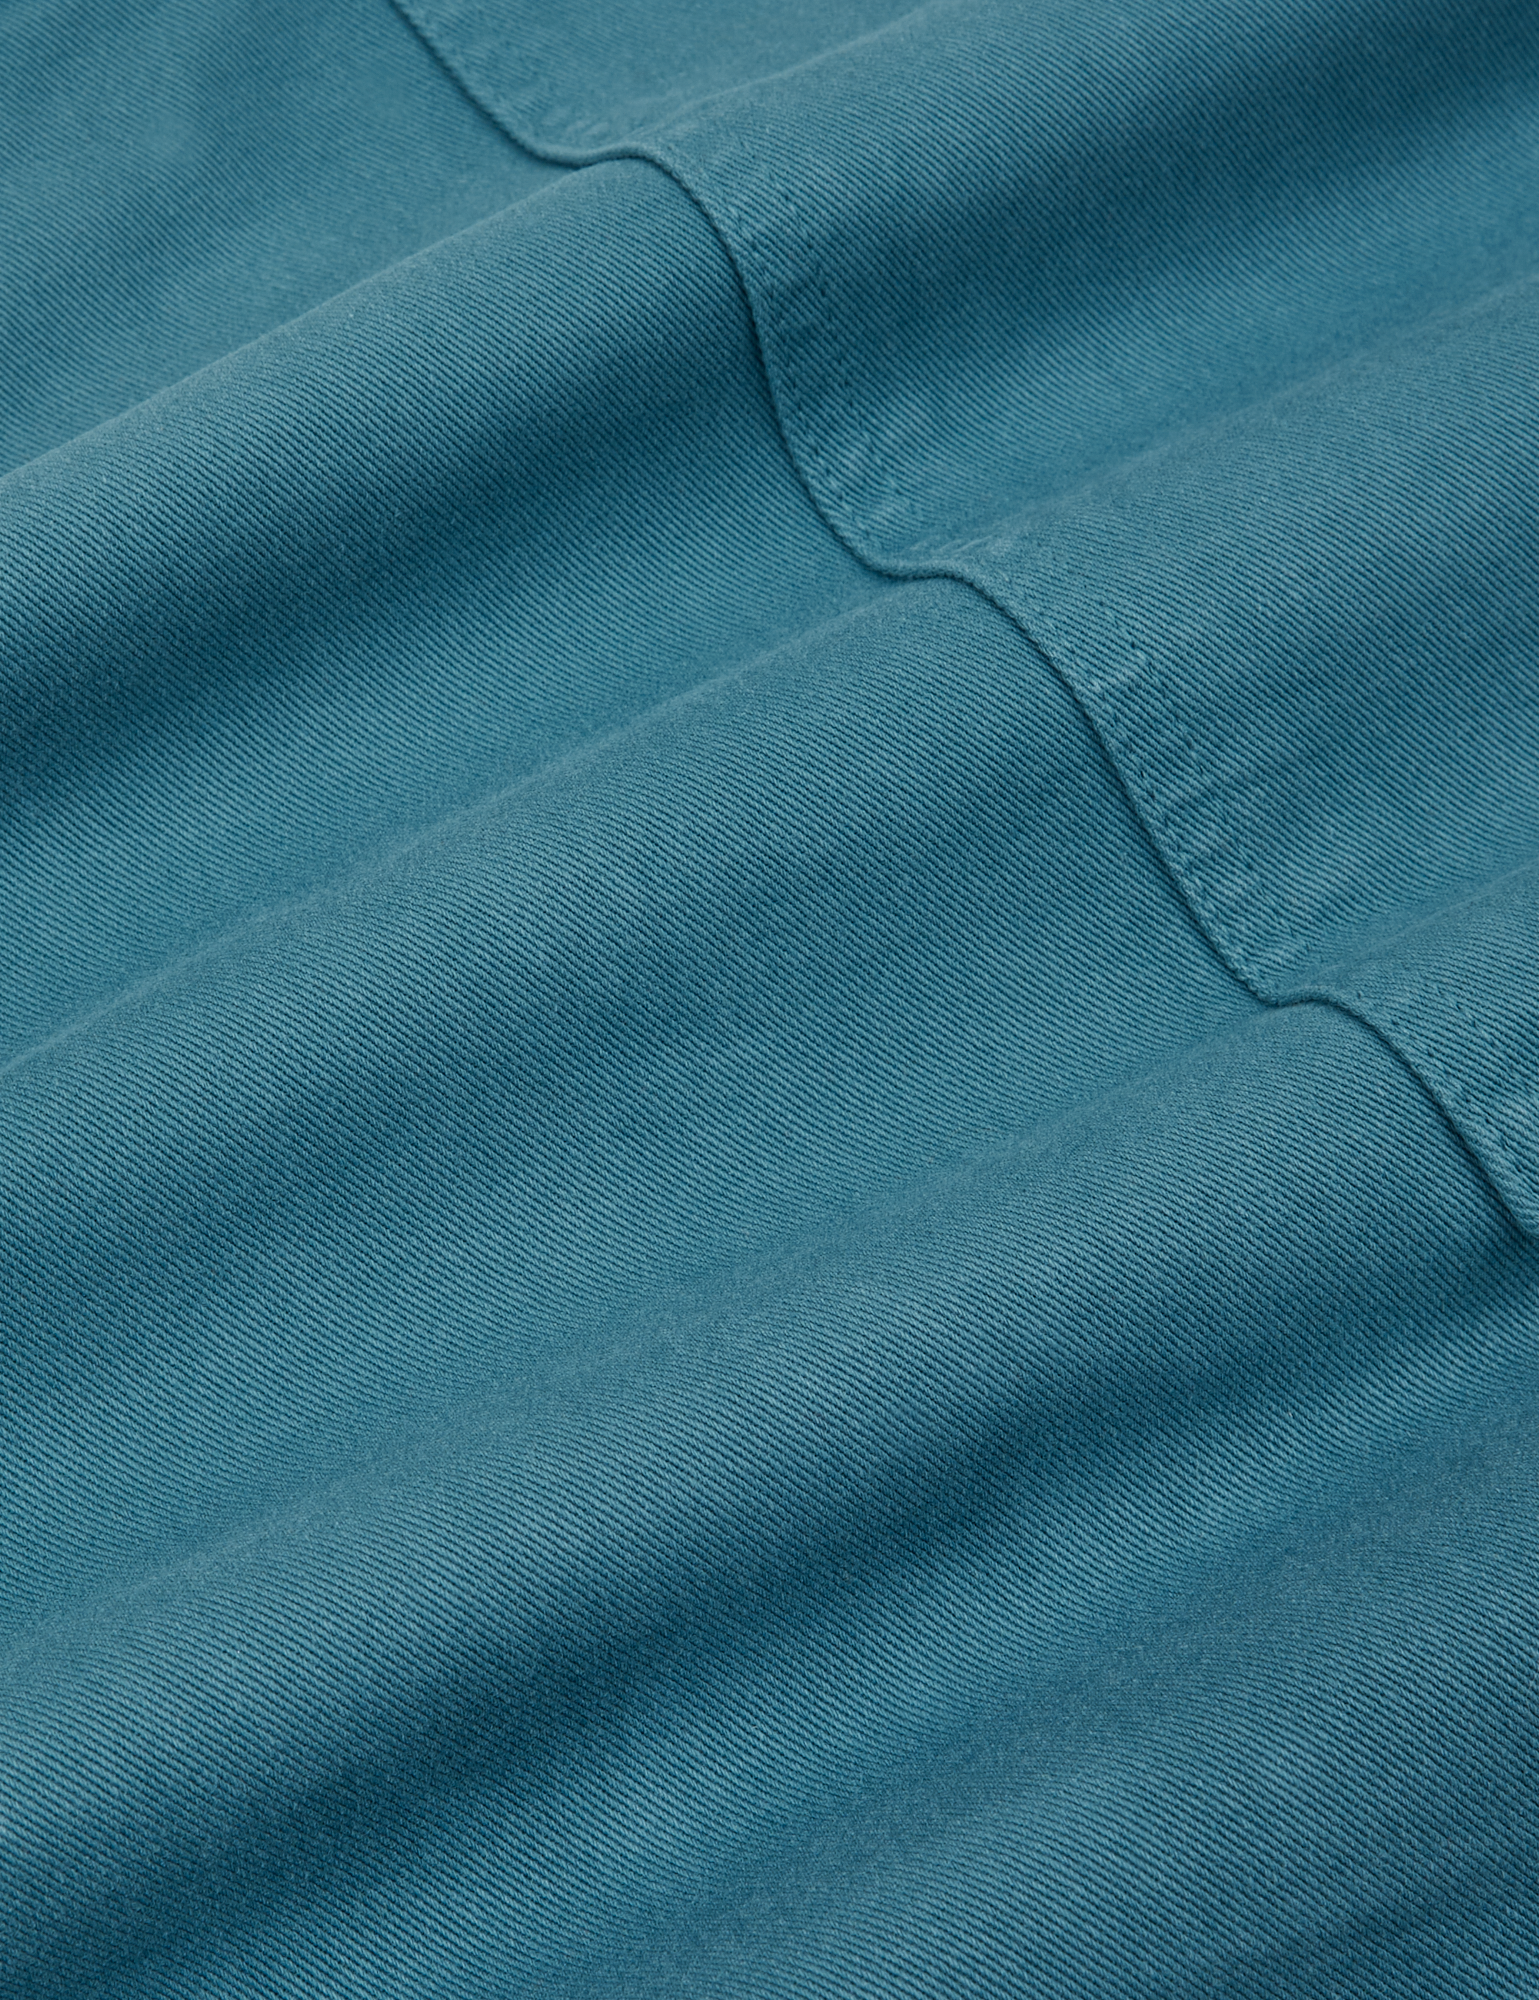 Classic Work Shorts in Marine Blue fabric detail close up